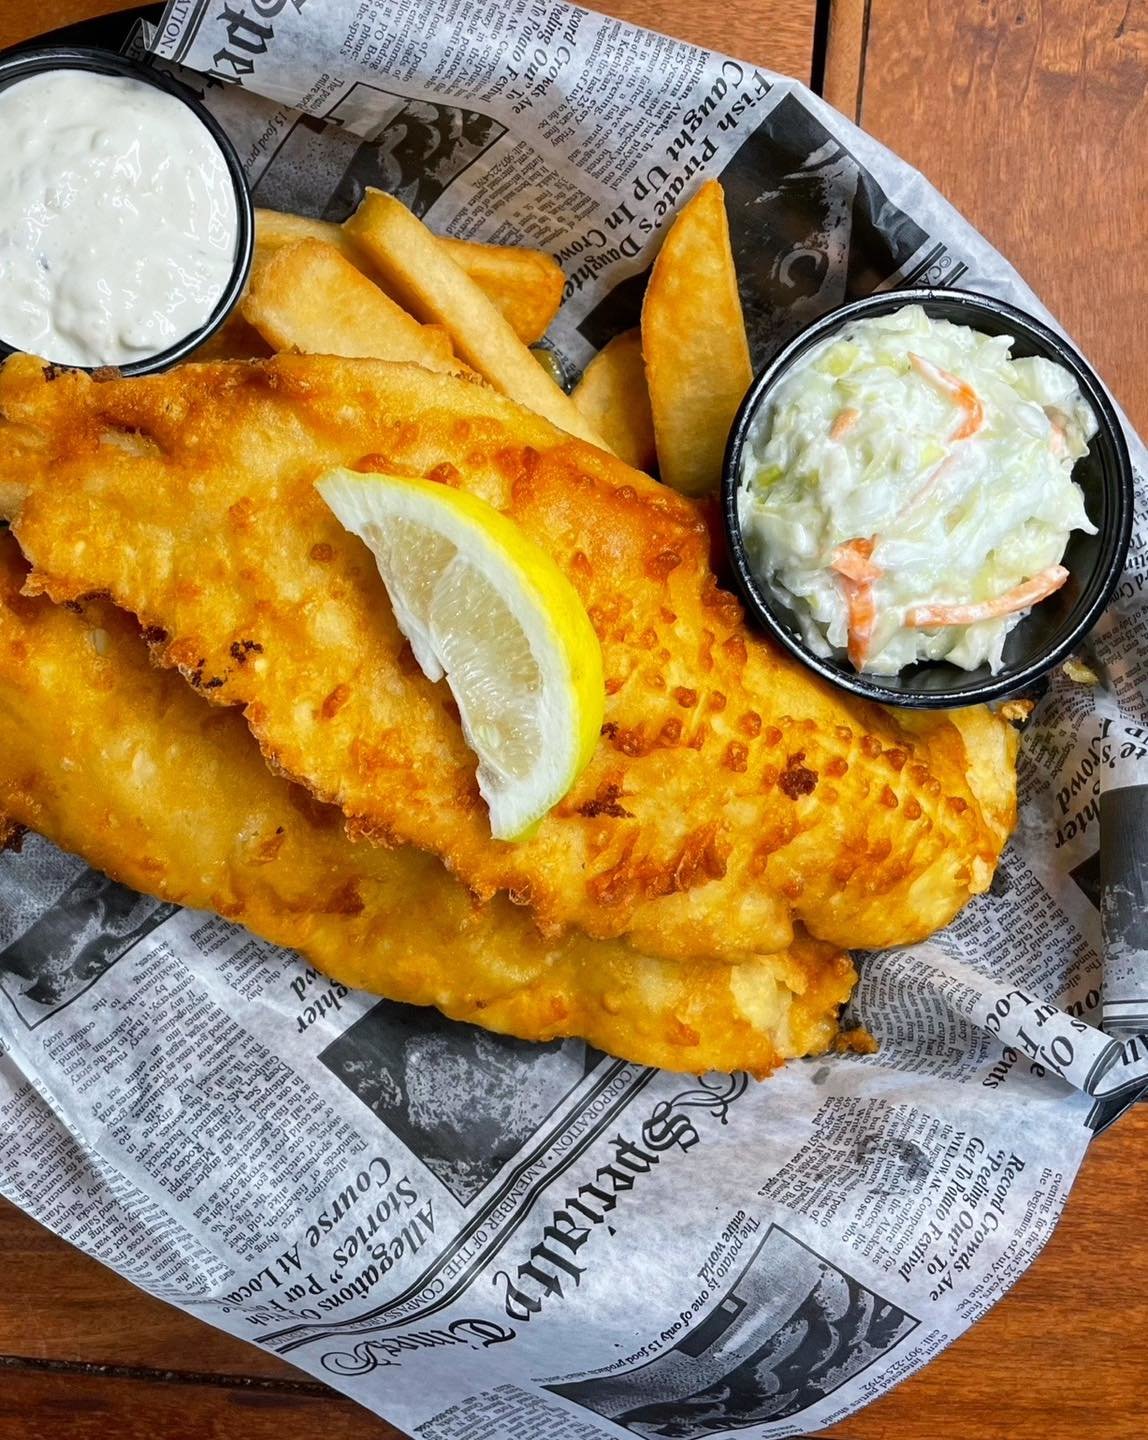 With The Claddagh Irish Pub in Eastwood Towne Center and Fish & Chips on East Michigan Avenue both now defunct, The Old Bag of Nails Pub is Lansing’s go-to spot for battered cod and steak fries. Try the fish Eddie Style with spicy batter, as the regular version can be a bit bland.